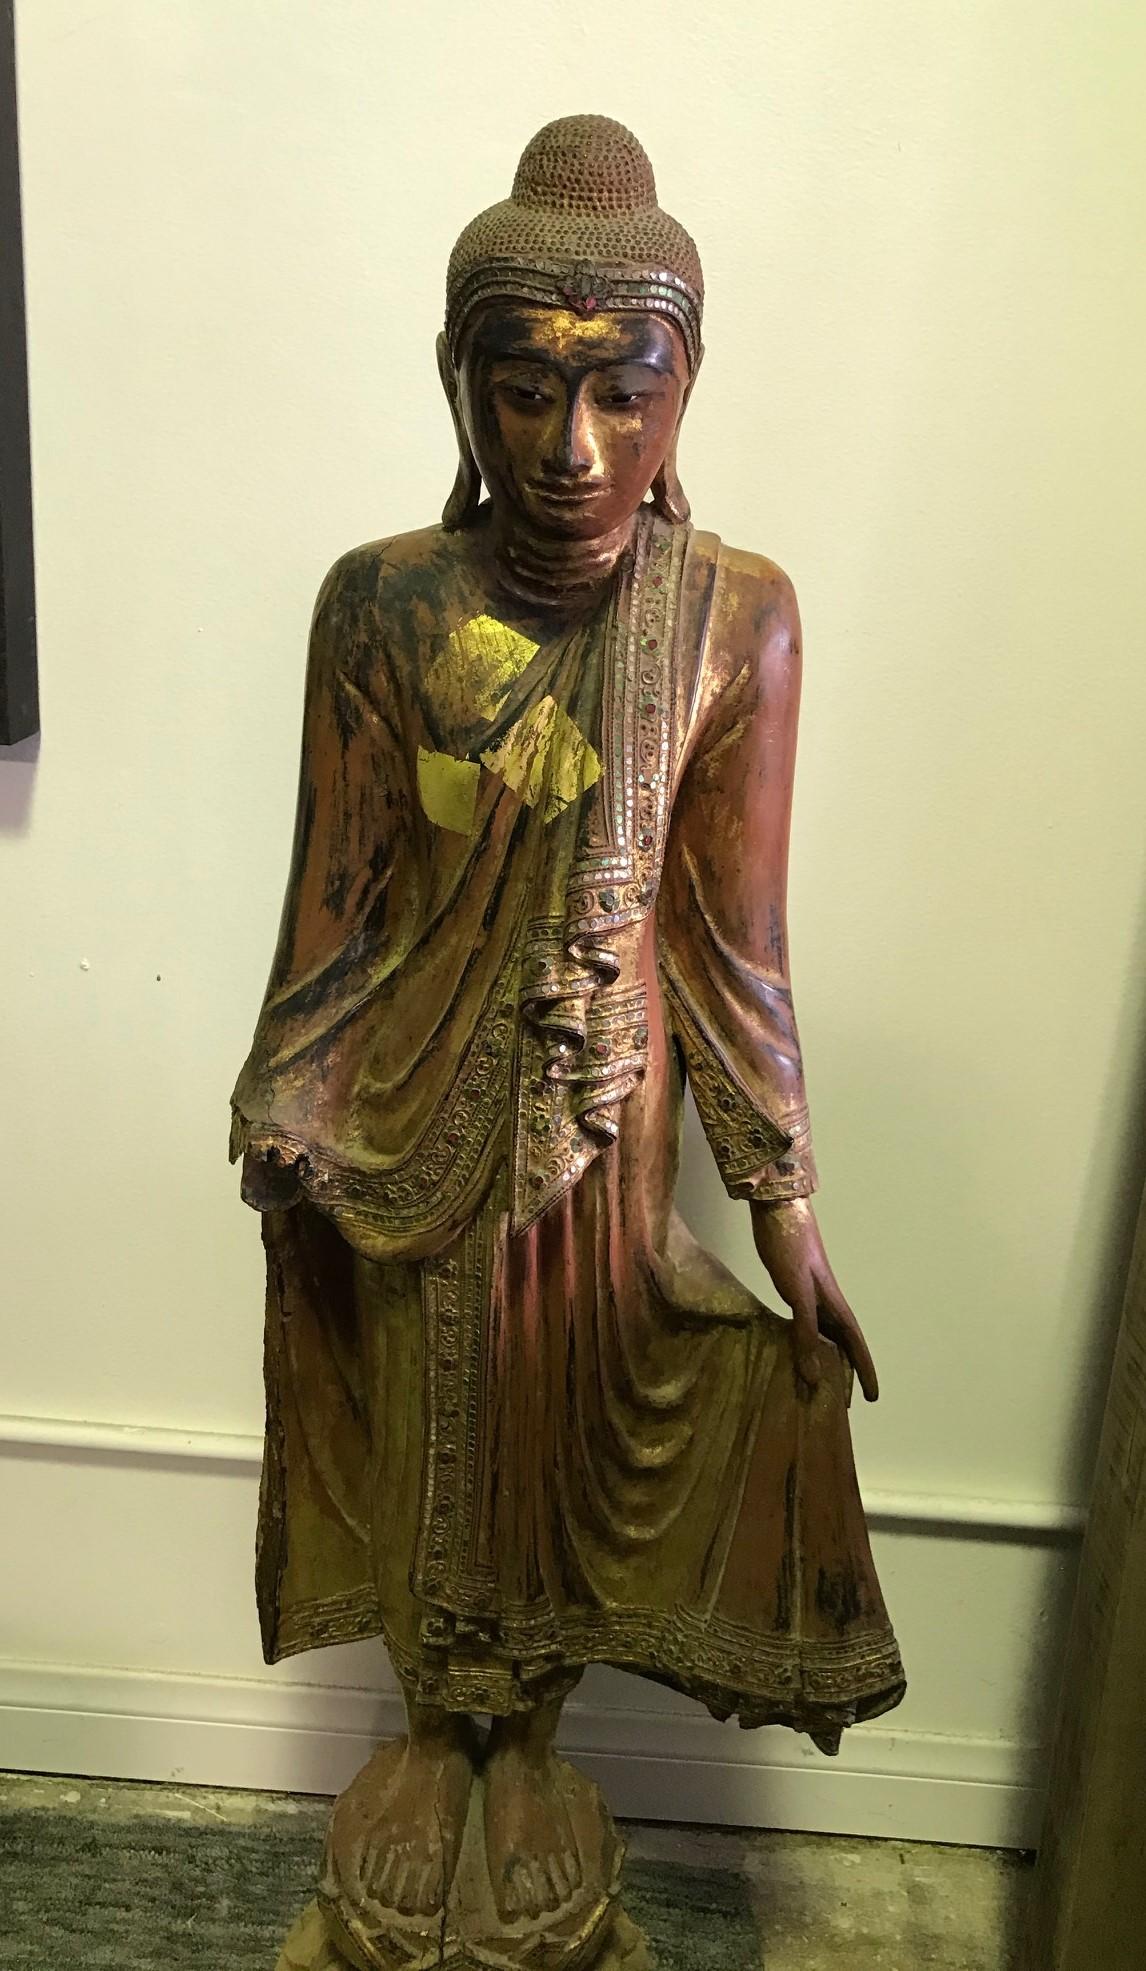 Tall hand-carved wooden standing Buddha. Beautifully carved and finely detailed. Likely Thai or Burmese. Decorated with lacquer and gilt (please see the gilt offering patches. Very unique and somewhat hard to come by). 

Would be a great addition